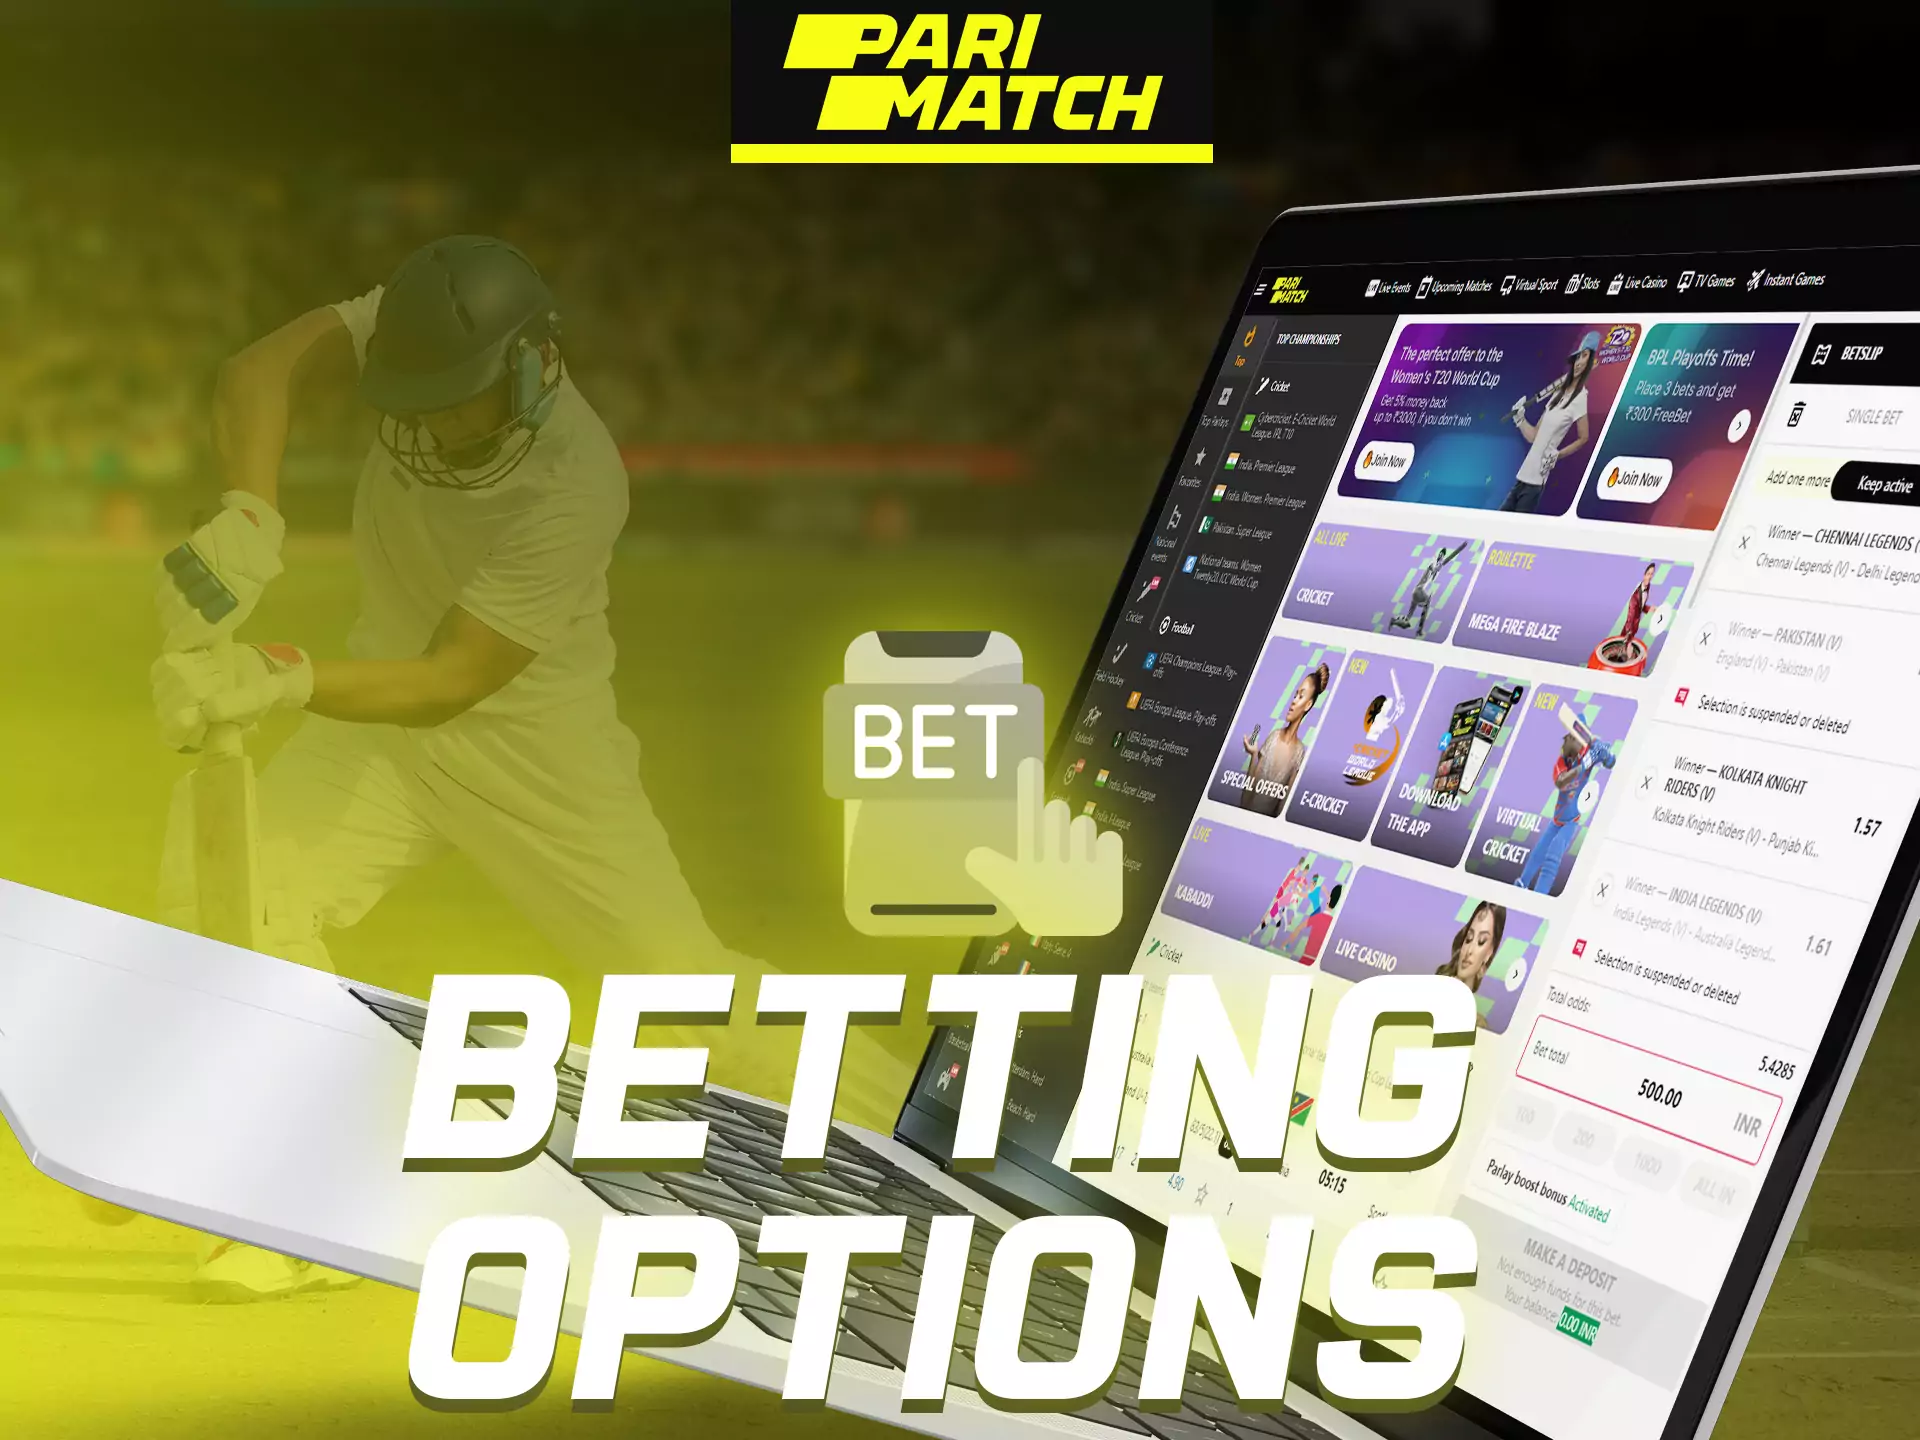 Bet in different ways and win more money with Parimatch.